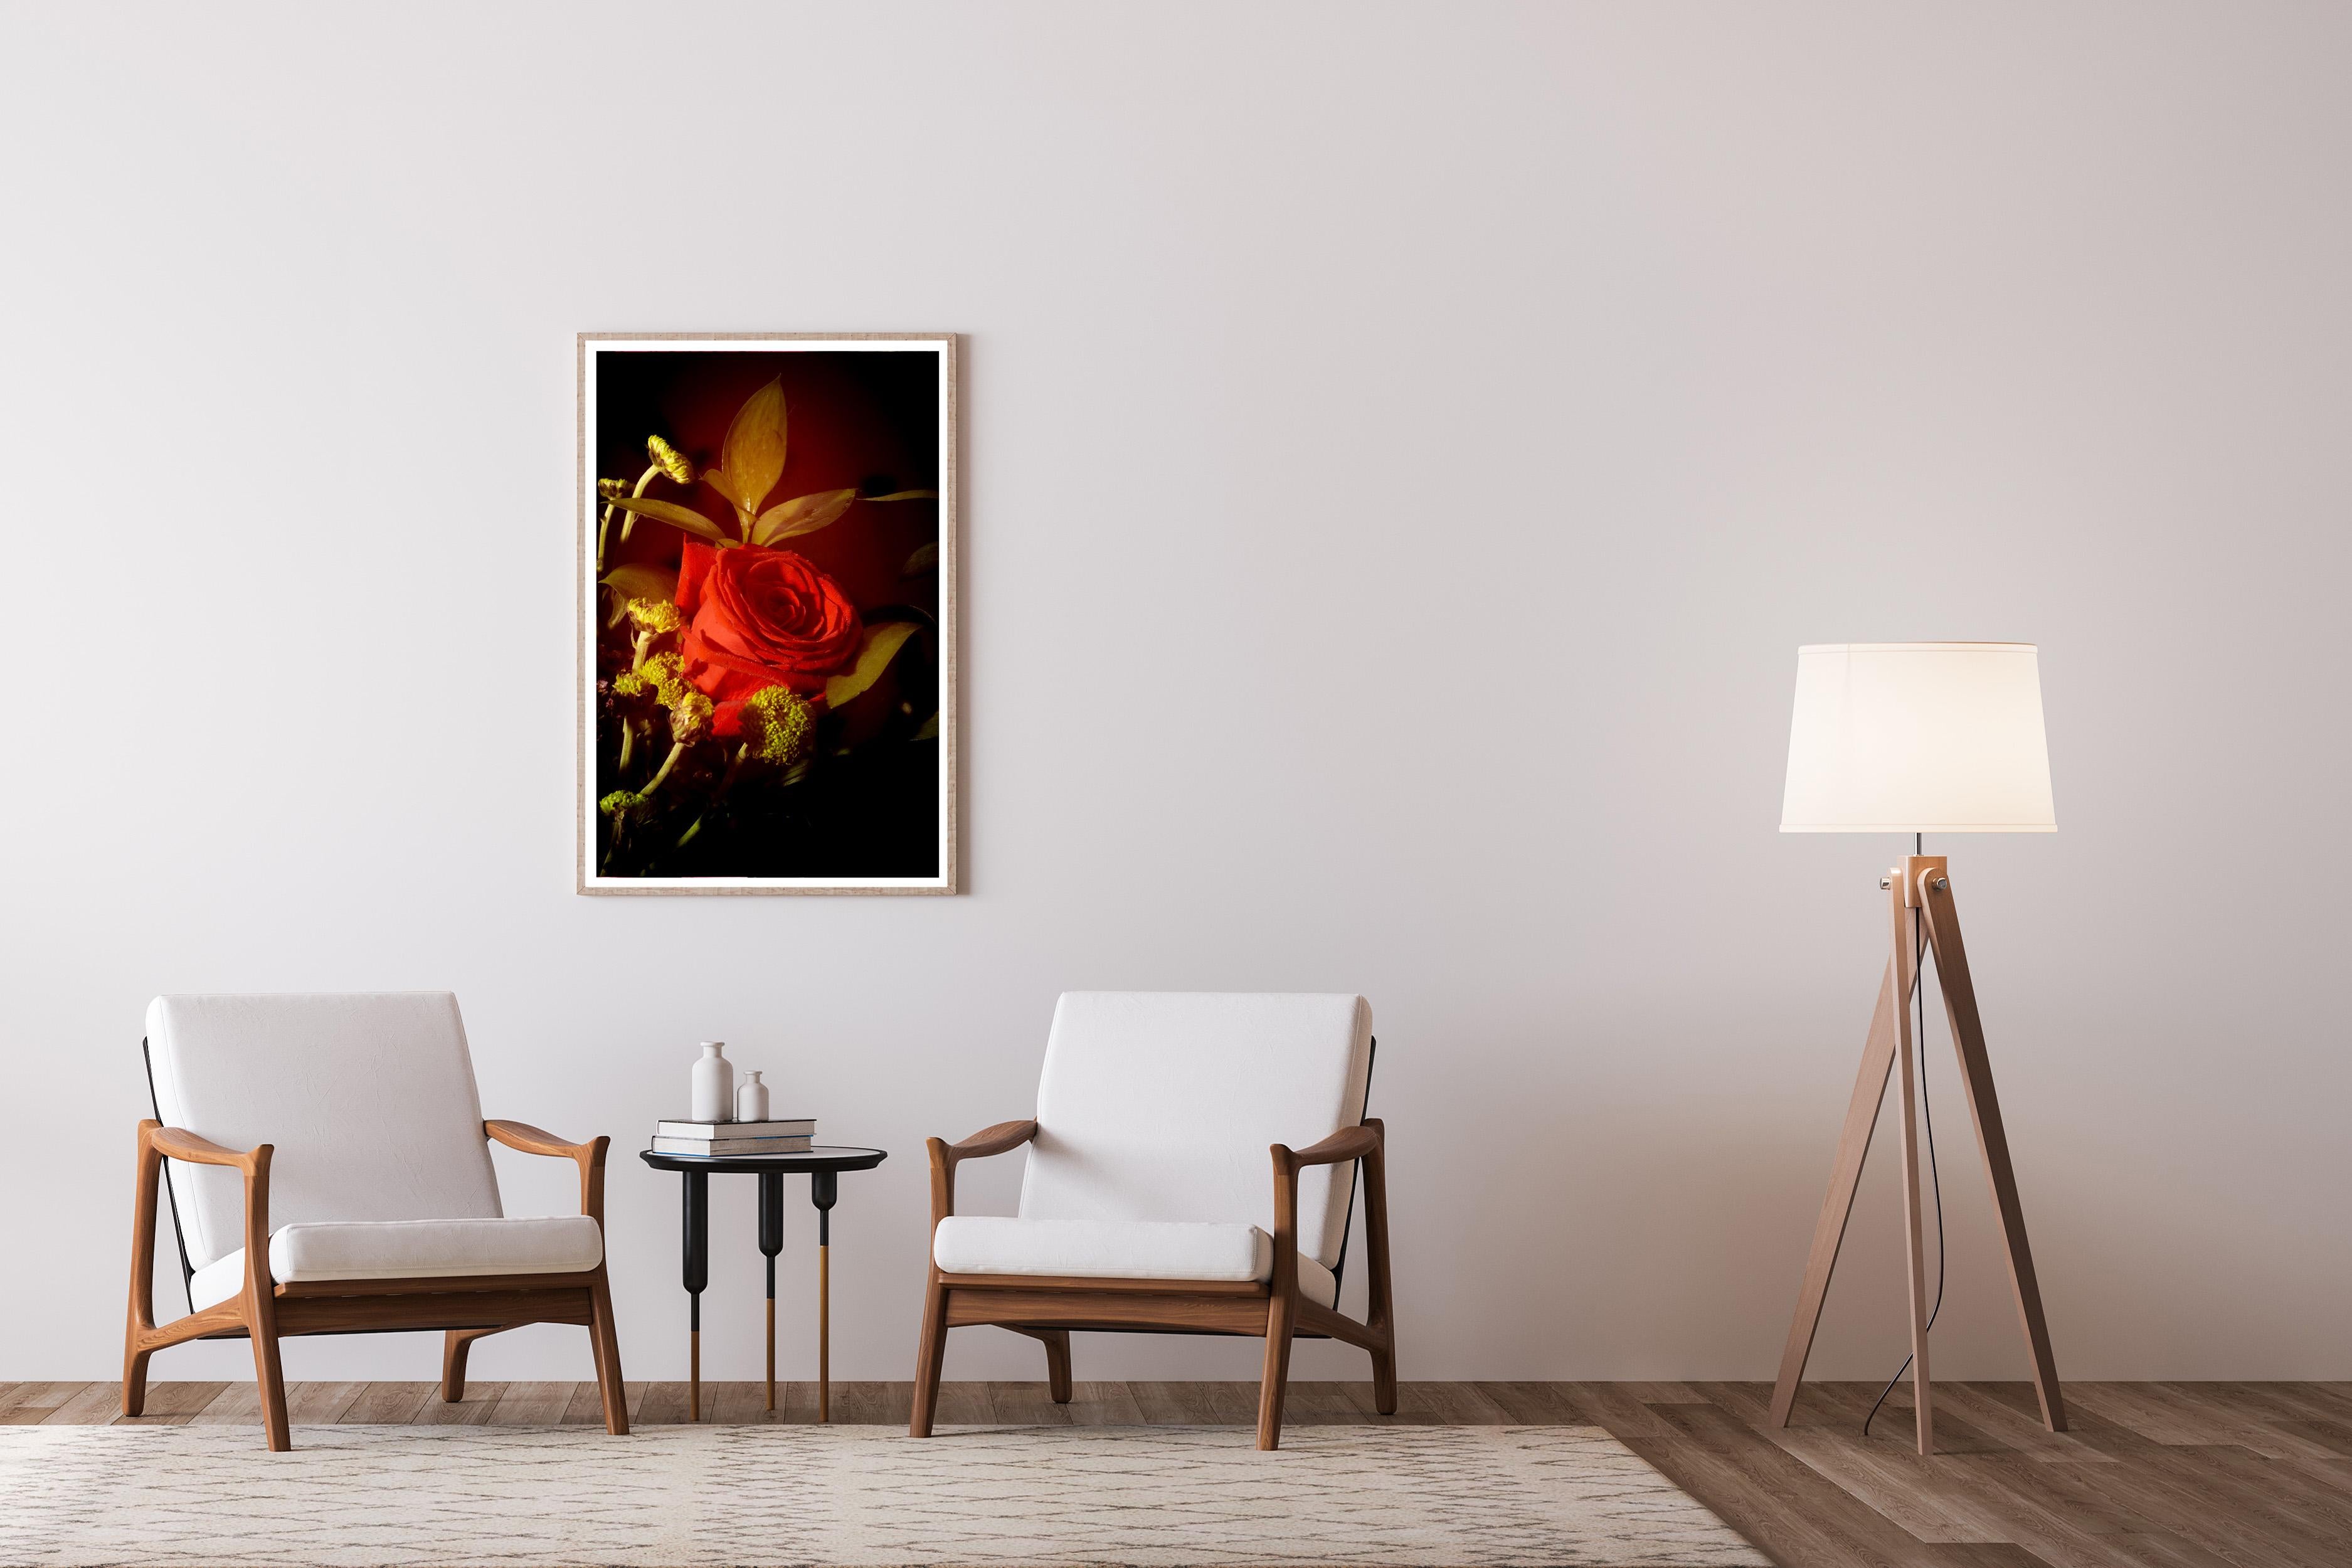 Red Rose in Vintage Light, Limited Edition Giclée Print, Vertical Still Life  - Black Still-Life Print by Kind of Cyan